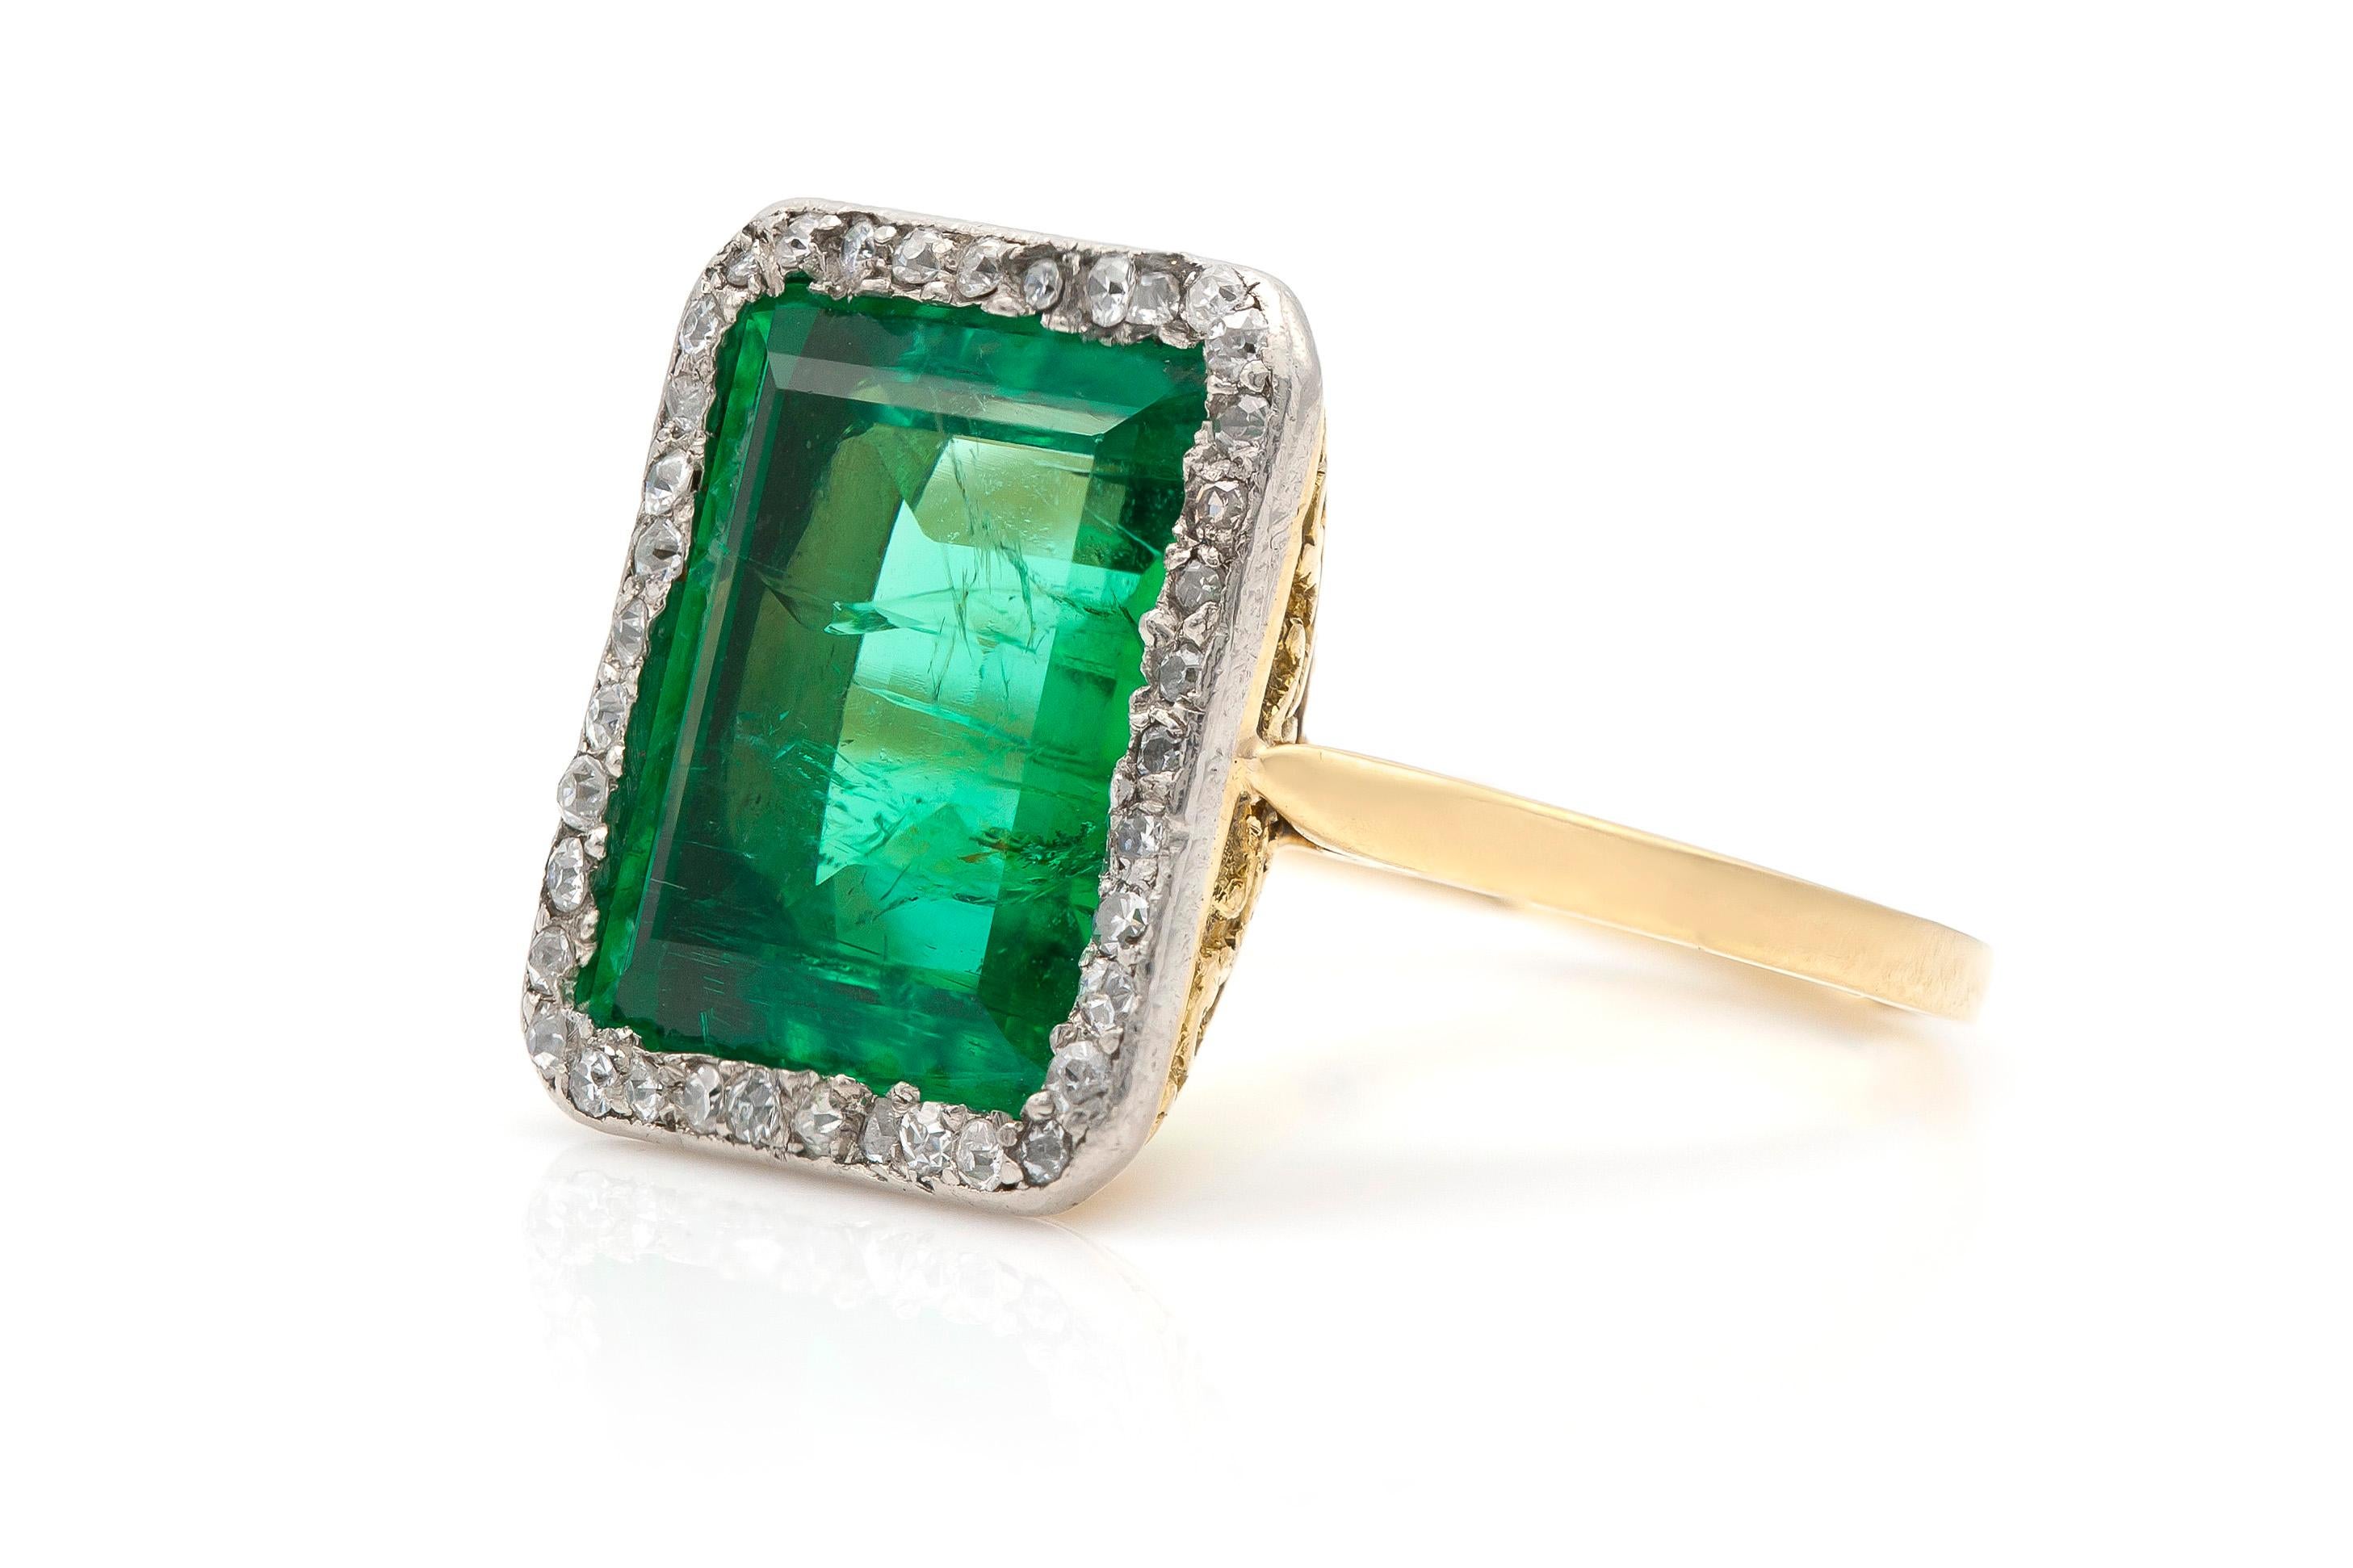 Finely crafted in yellow gold and platinum with a center Russian Emerald from Ural Mountains, weighing 7.20 carats.
The ring features round cut diamonds around the emerald.
Edwardian, circa 1910s.
AGL Certificate available